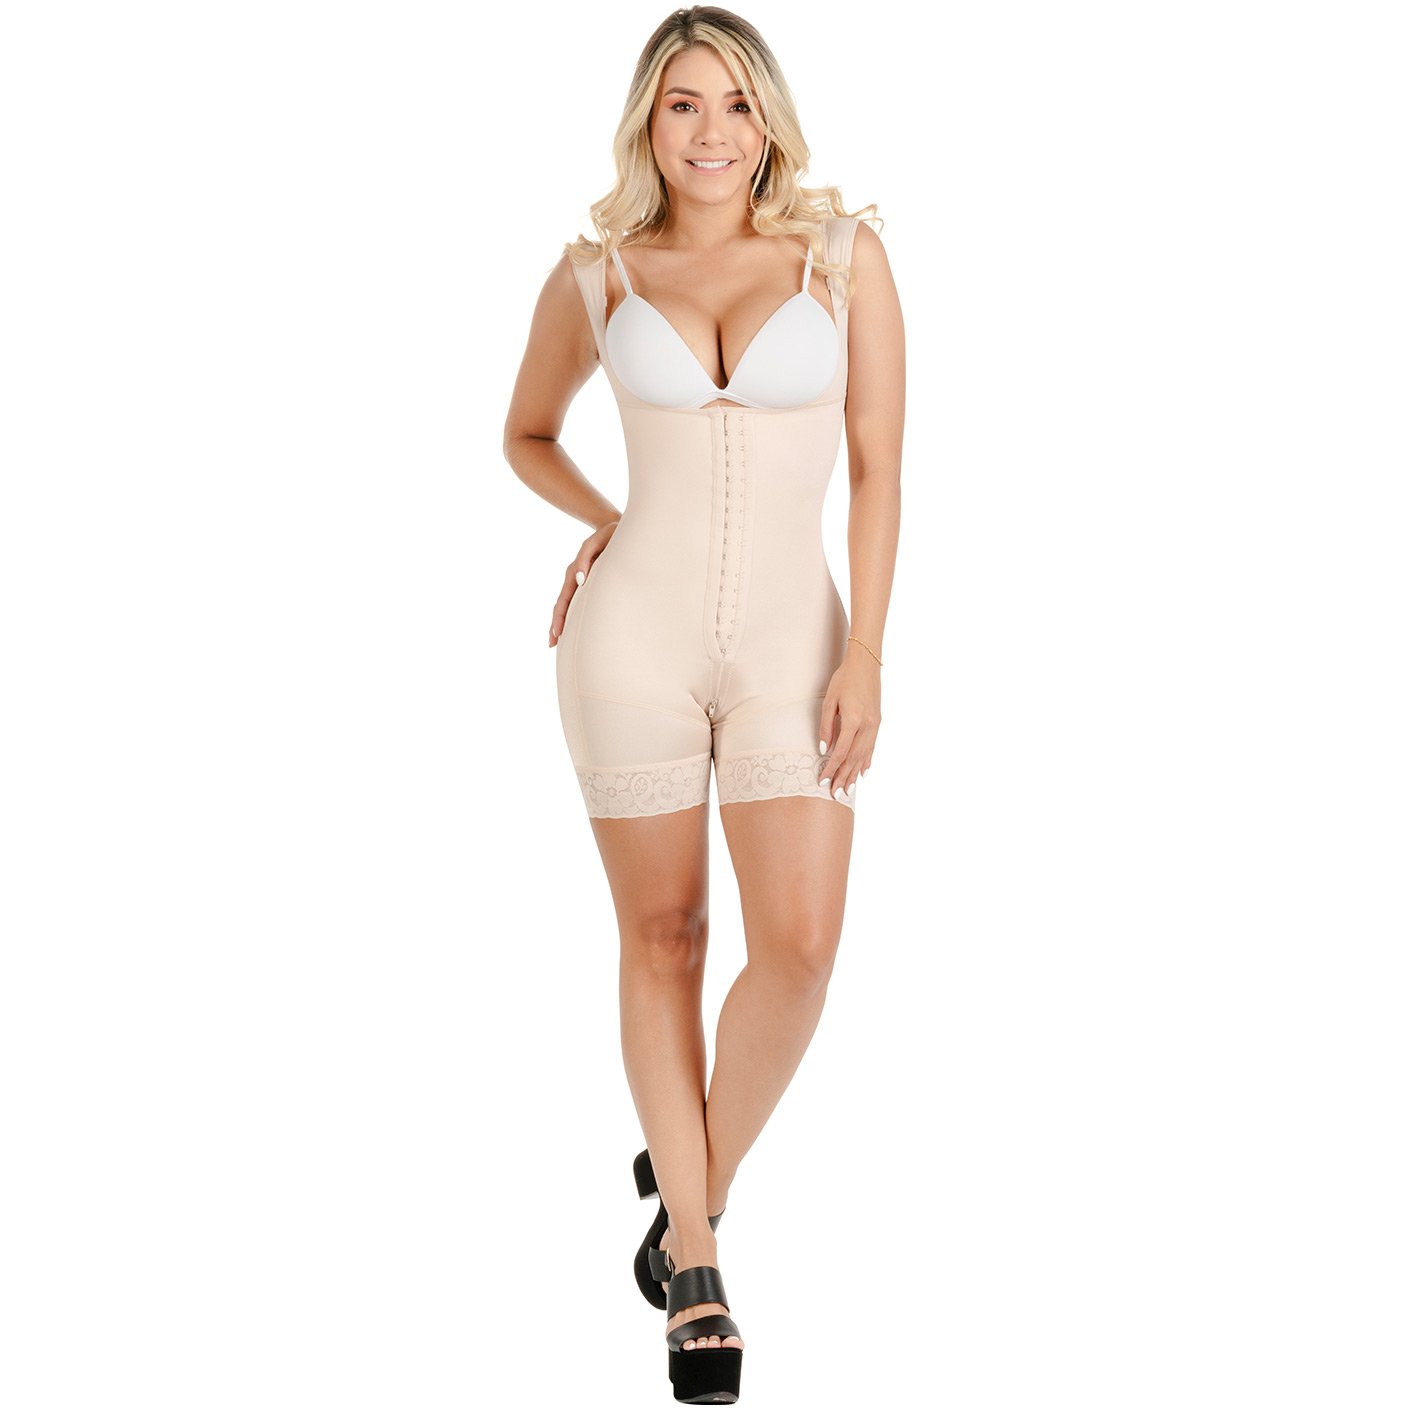 Fajas SONRYSE TR211 | Wider Straps Full Support Post Surgery Compression Garment Women Bodysuit | Tummy Control Women Body Shaper Mid Thigh Butt Lifter - fajacolombian